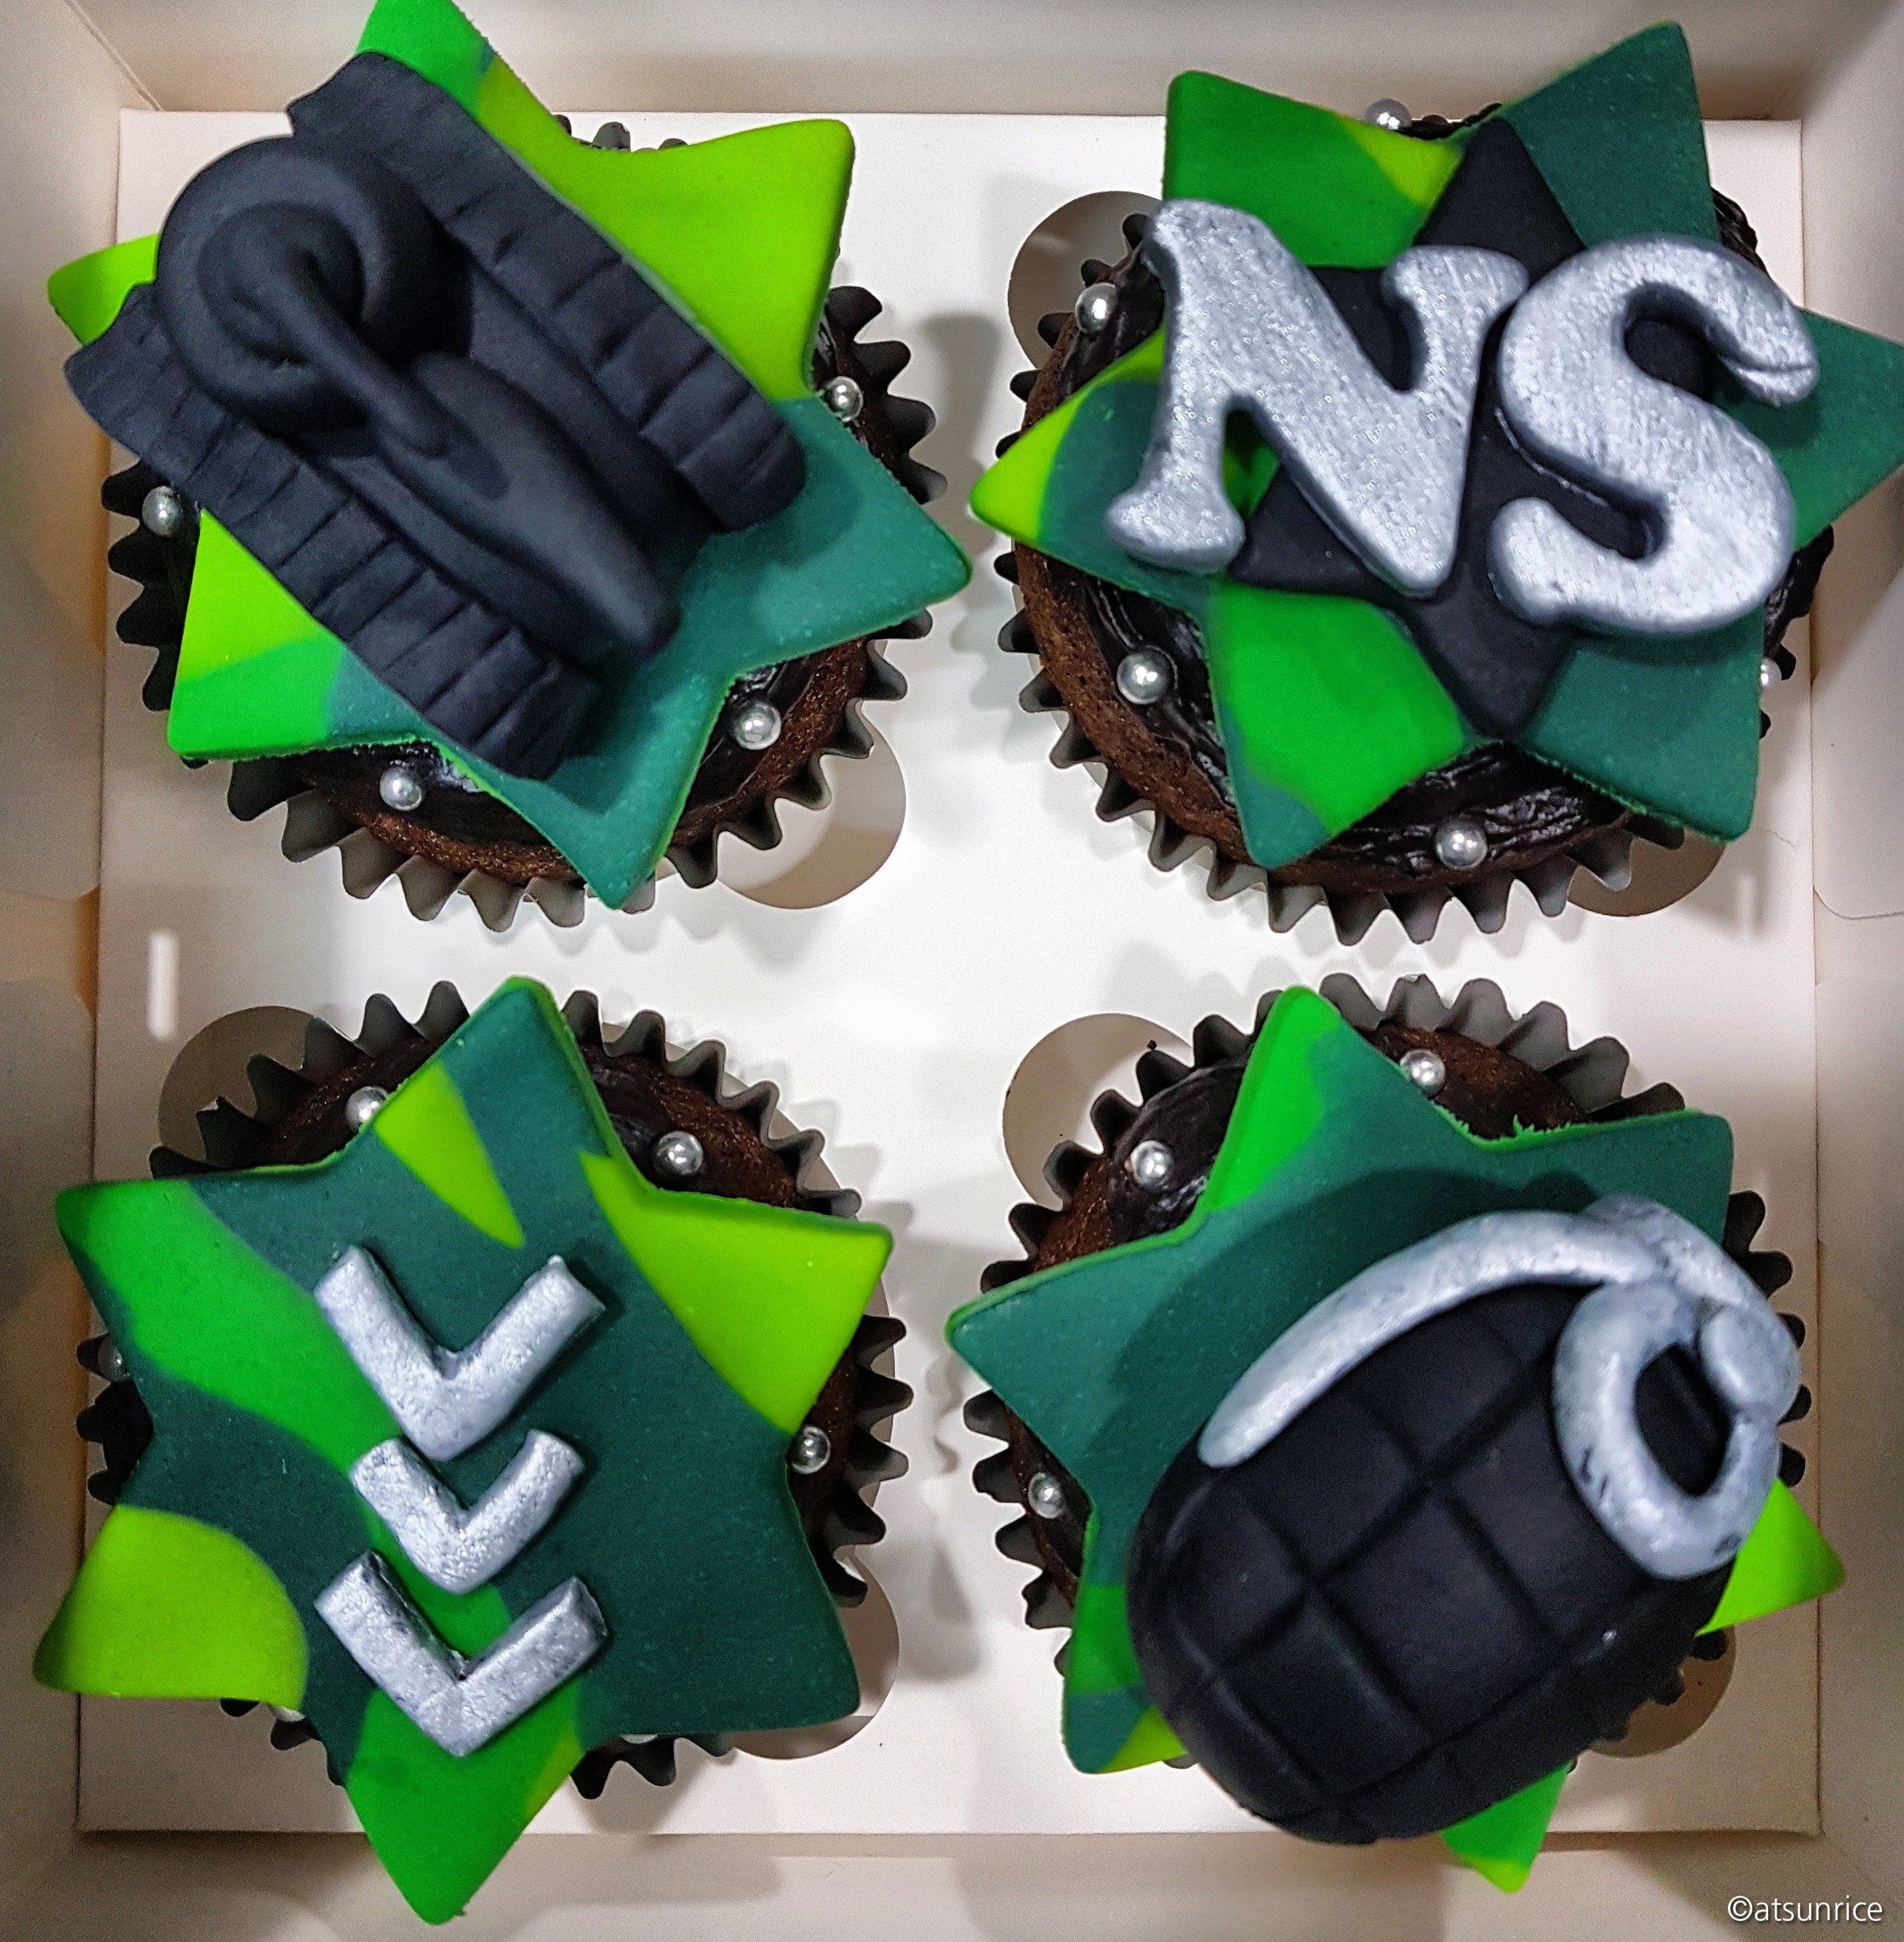 Anyone up for some army-designed cupcakes?
